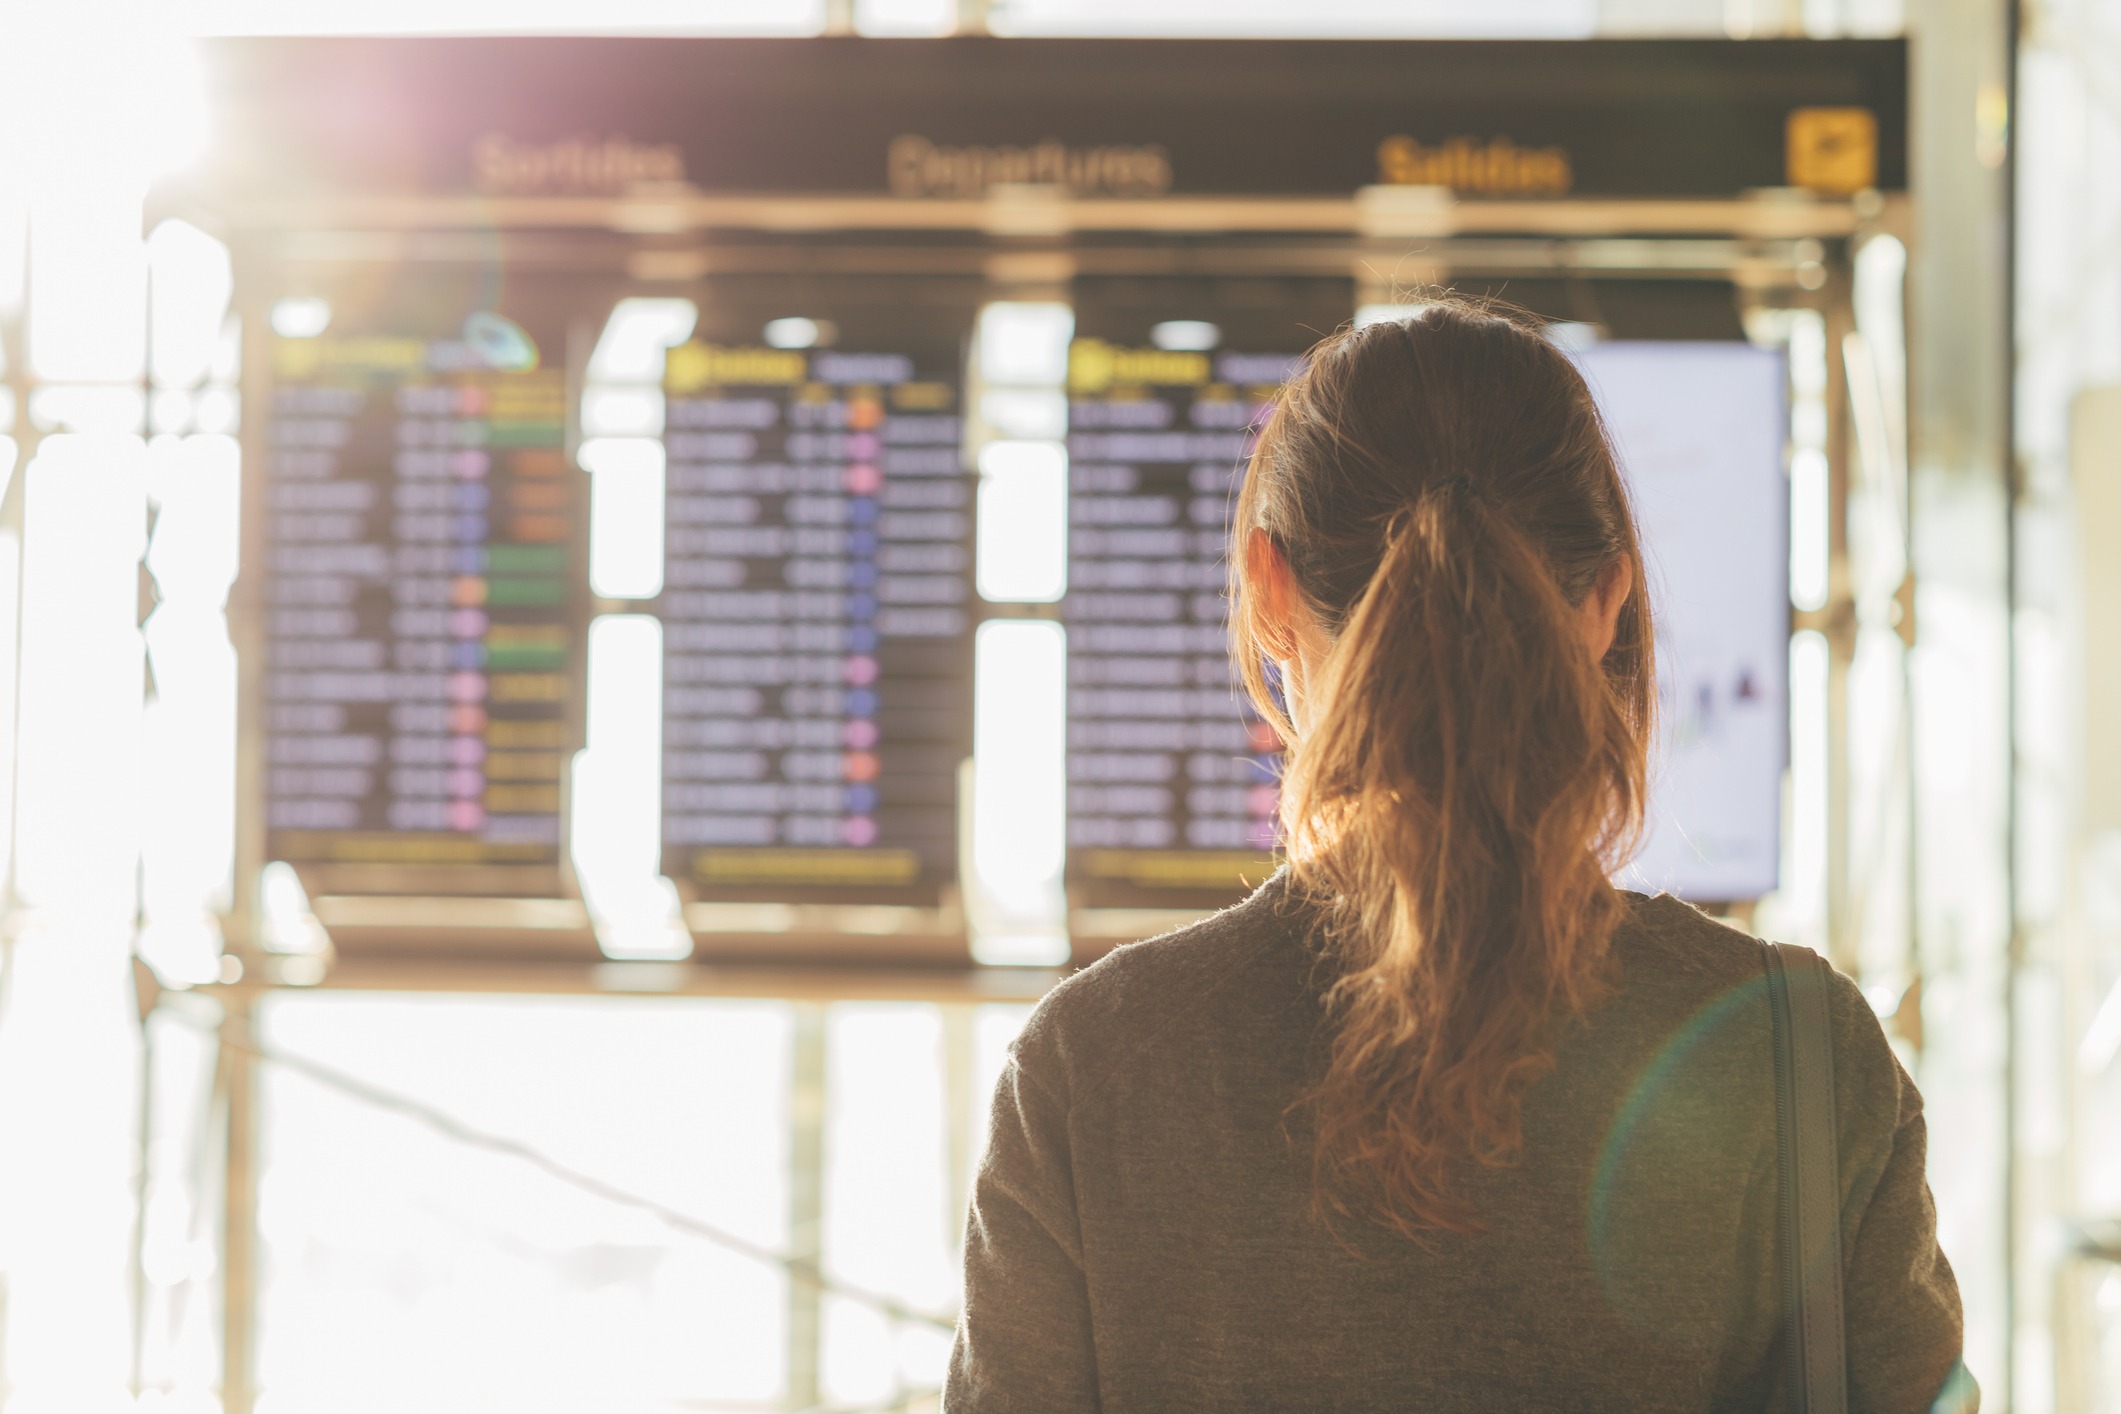 A woman with brown hair looks at a board of flight departures and arrivals.